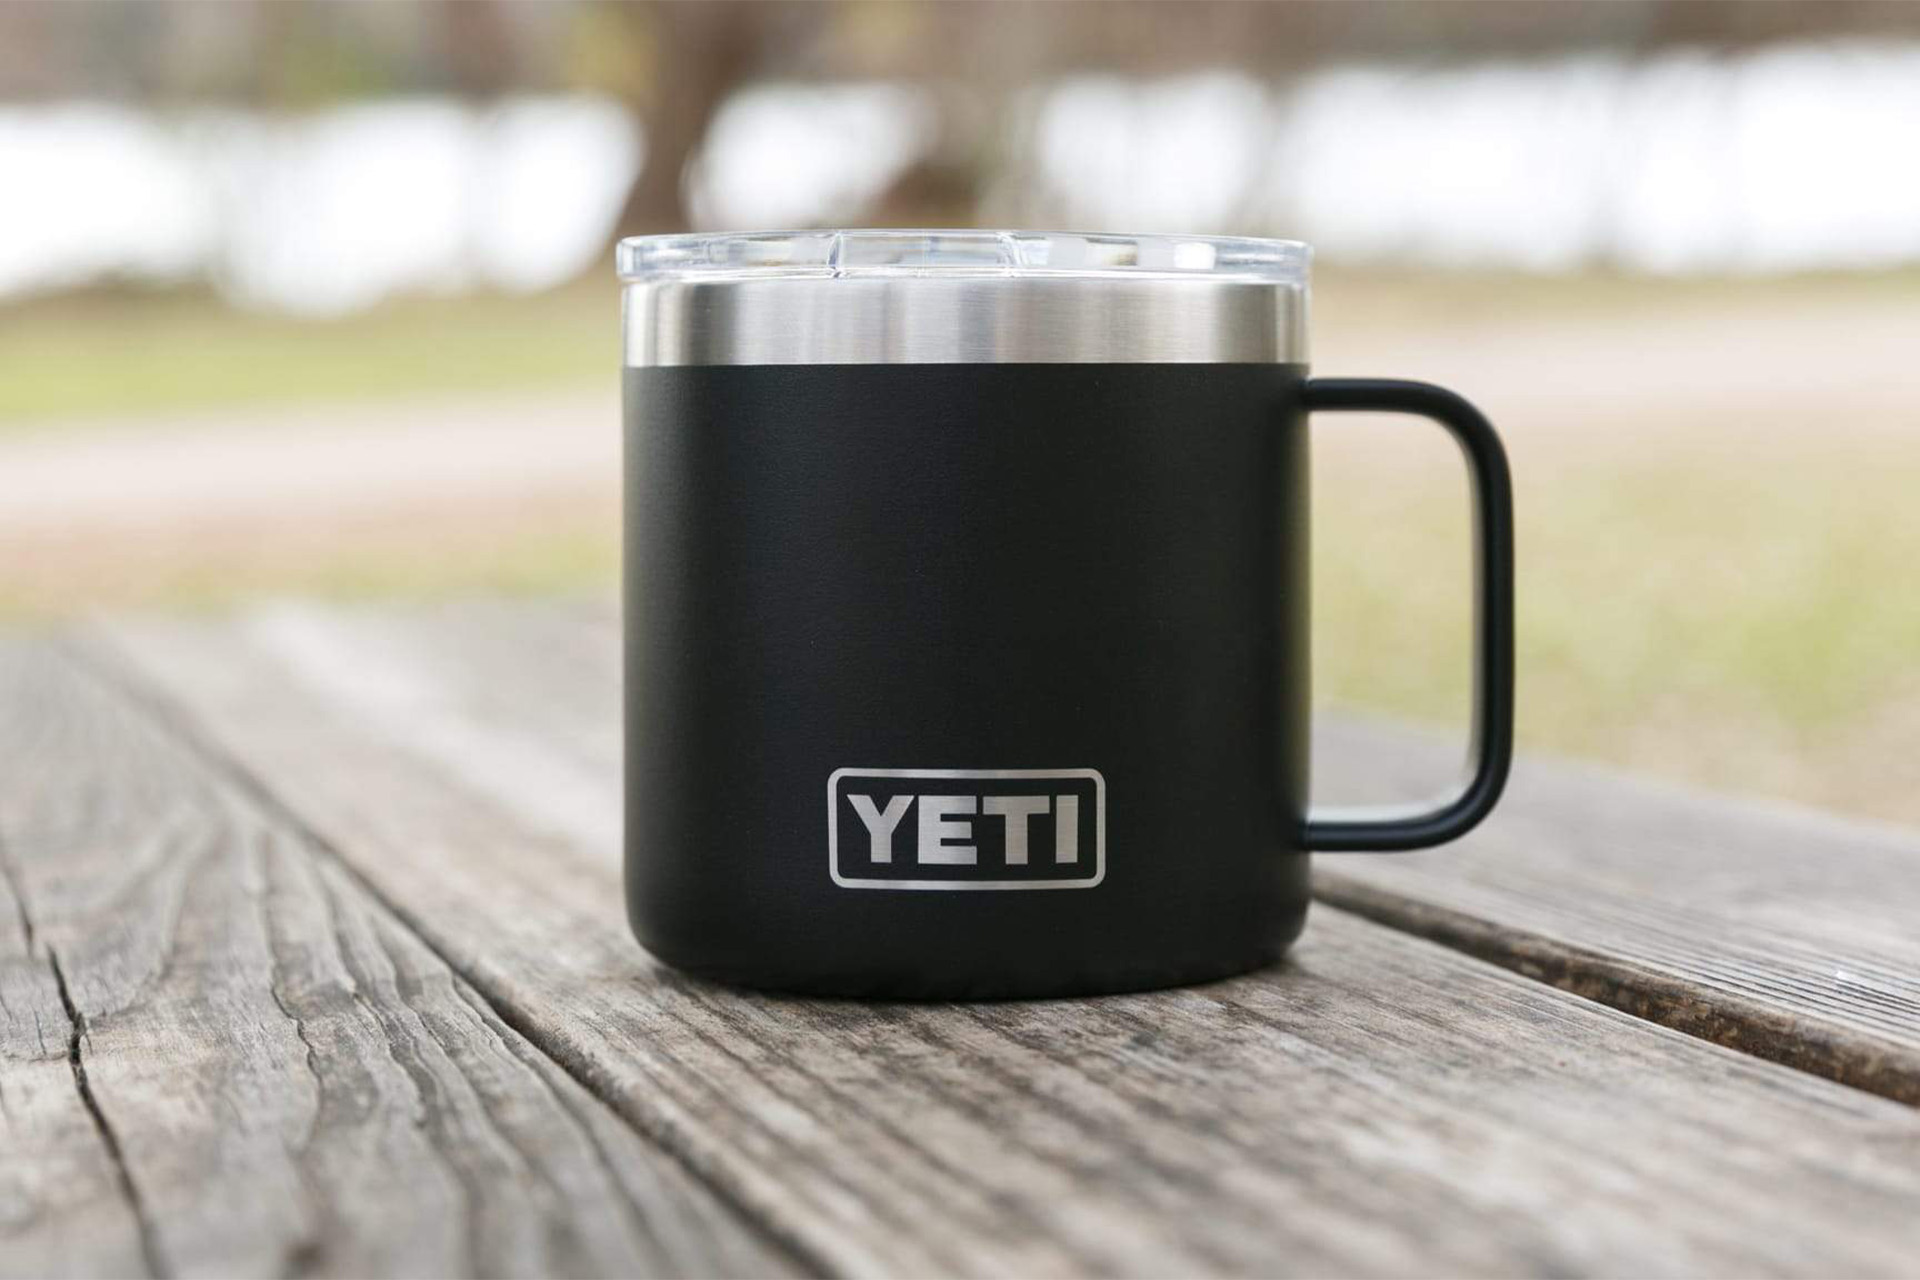 Yeti just launched a Beverage Bucket